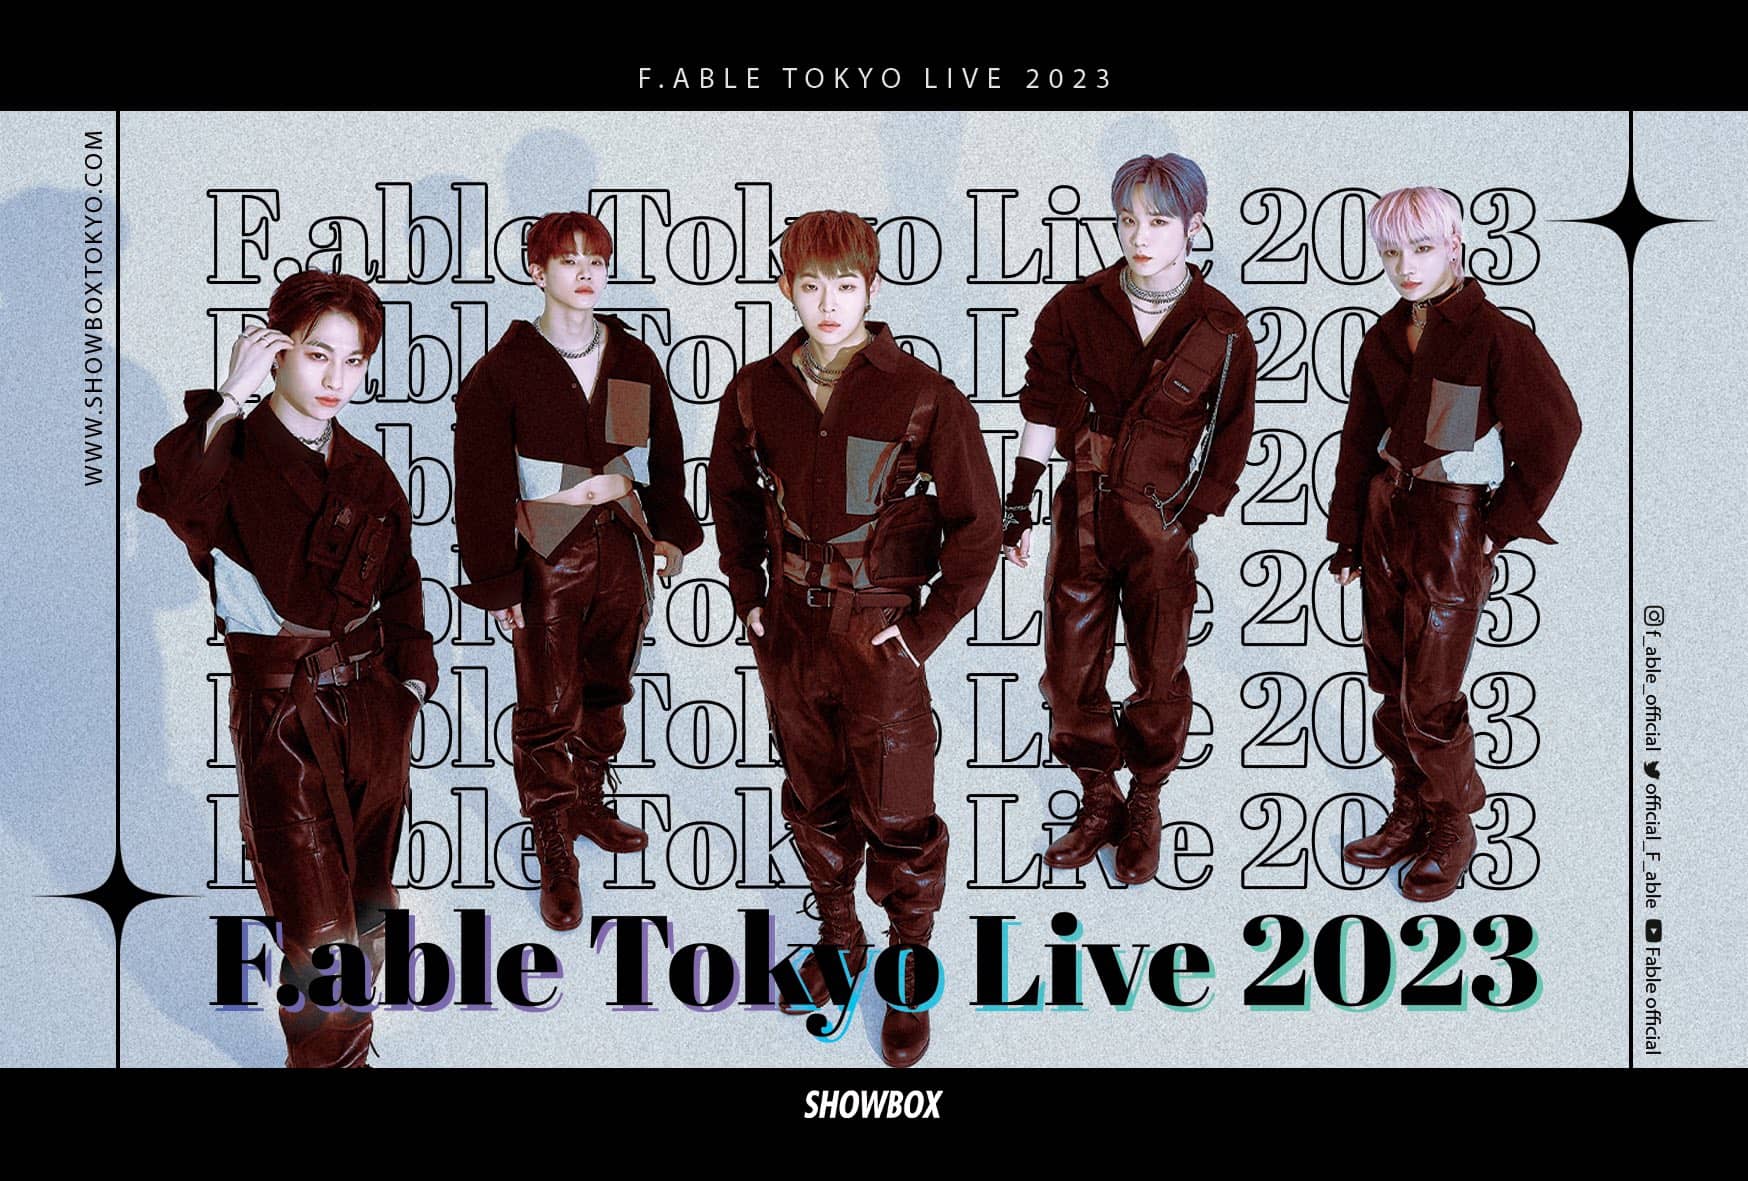 F.able Tokyo Live 2023